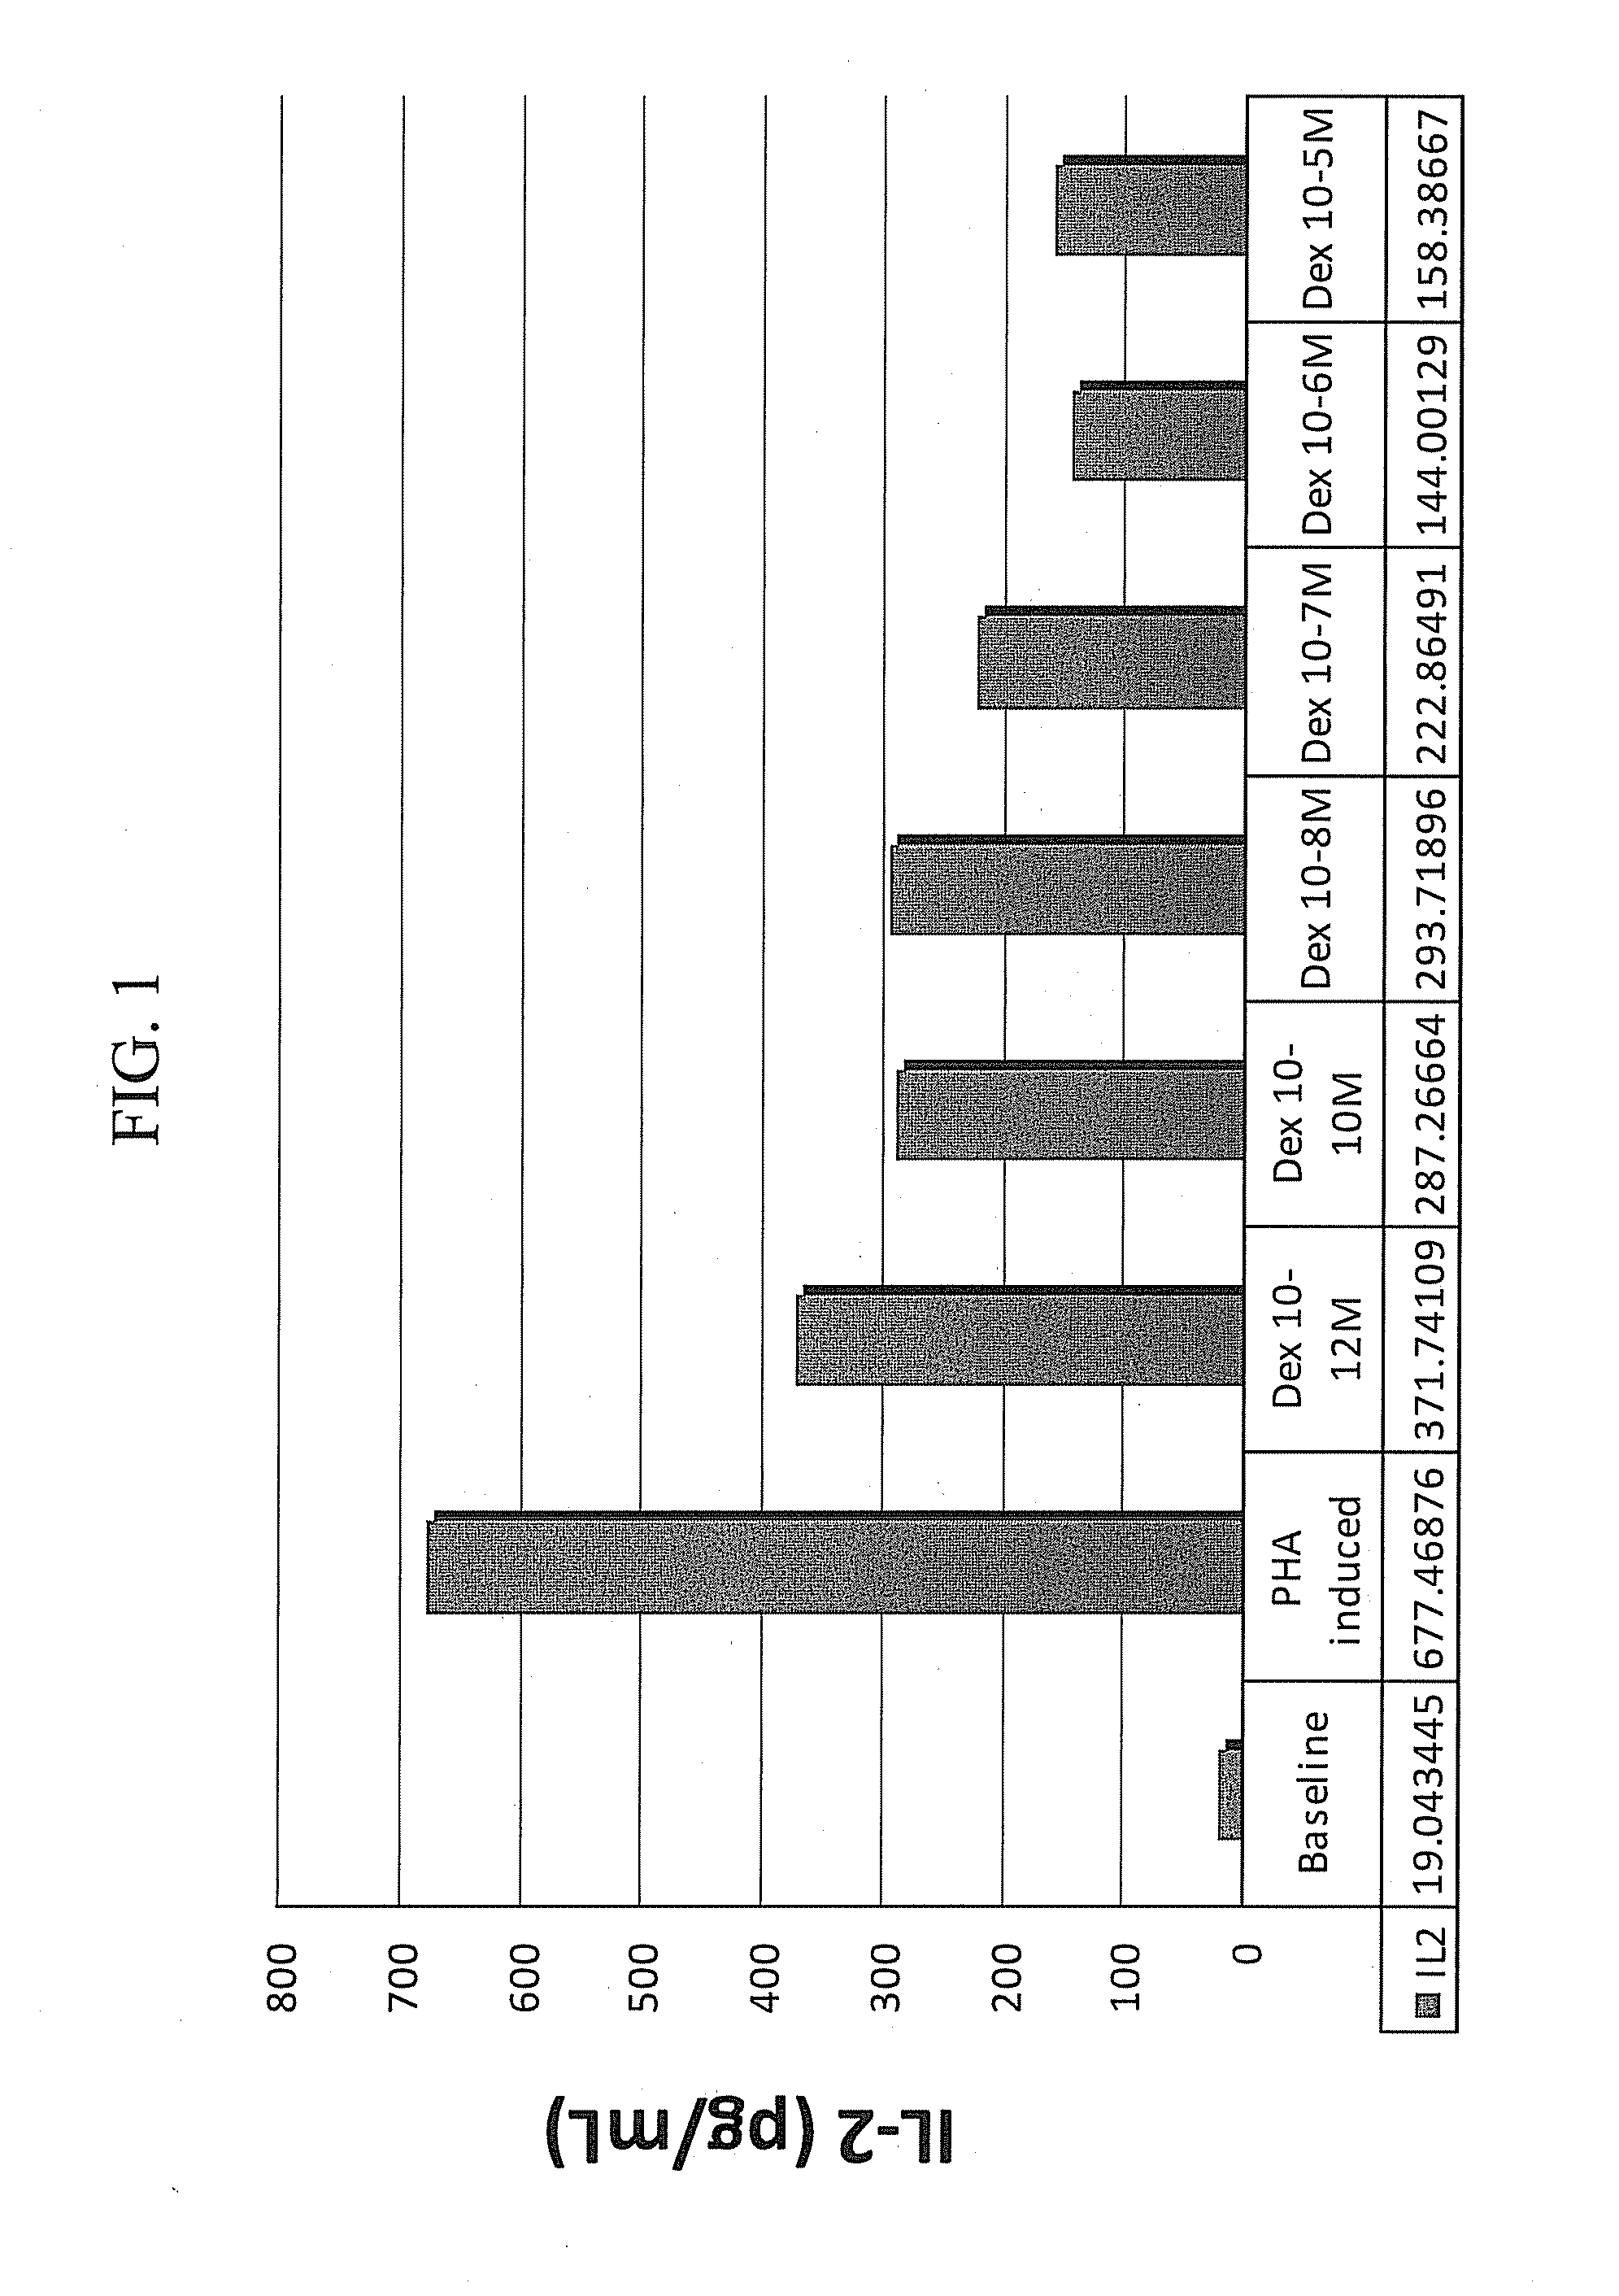 Methods for the use of progestogen as a glucocorticoid sensitizer